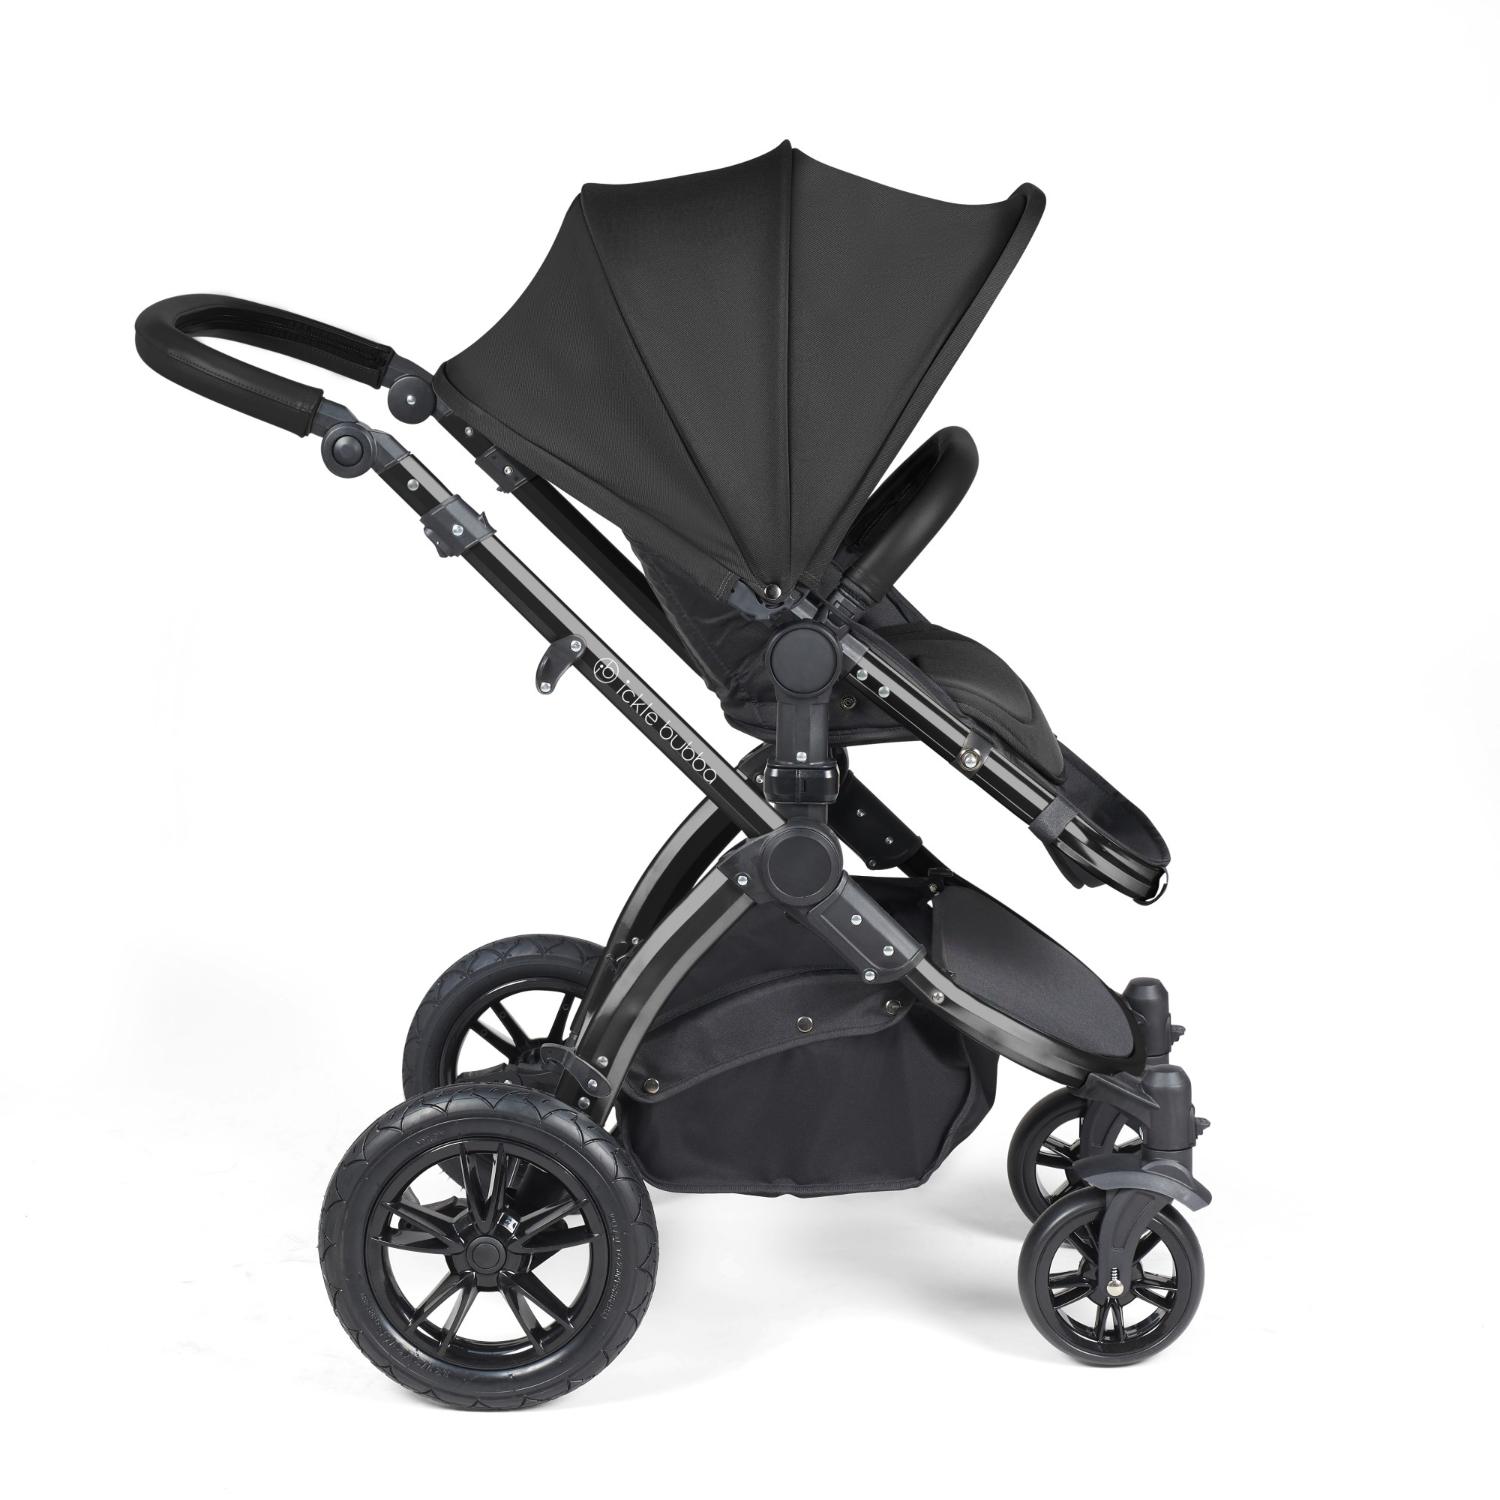 Side view of Ickle Bubba Stomp Luxe Pushchair with seat unit attached in Midnight black colour